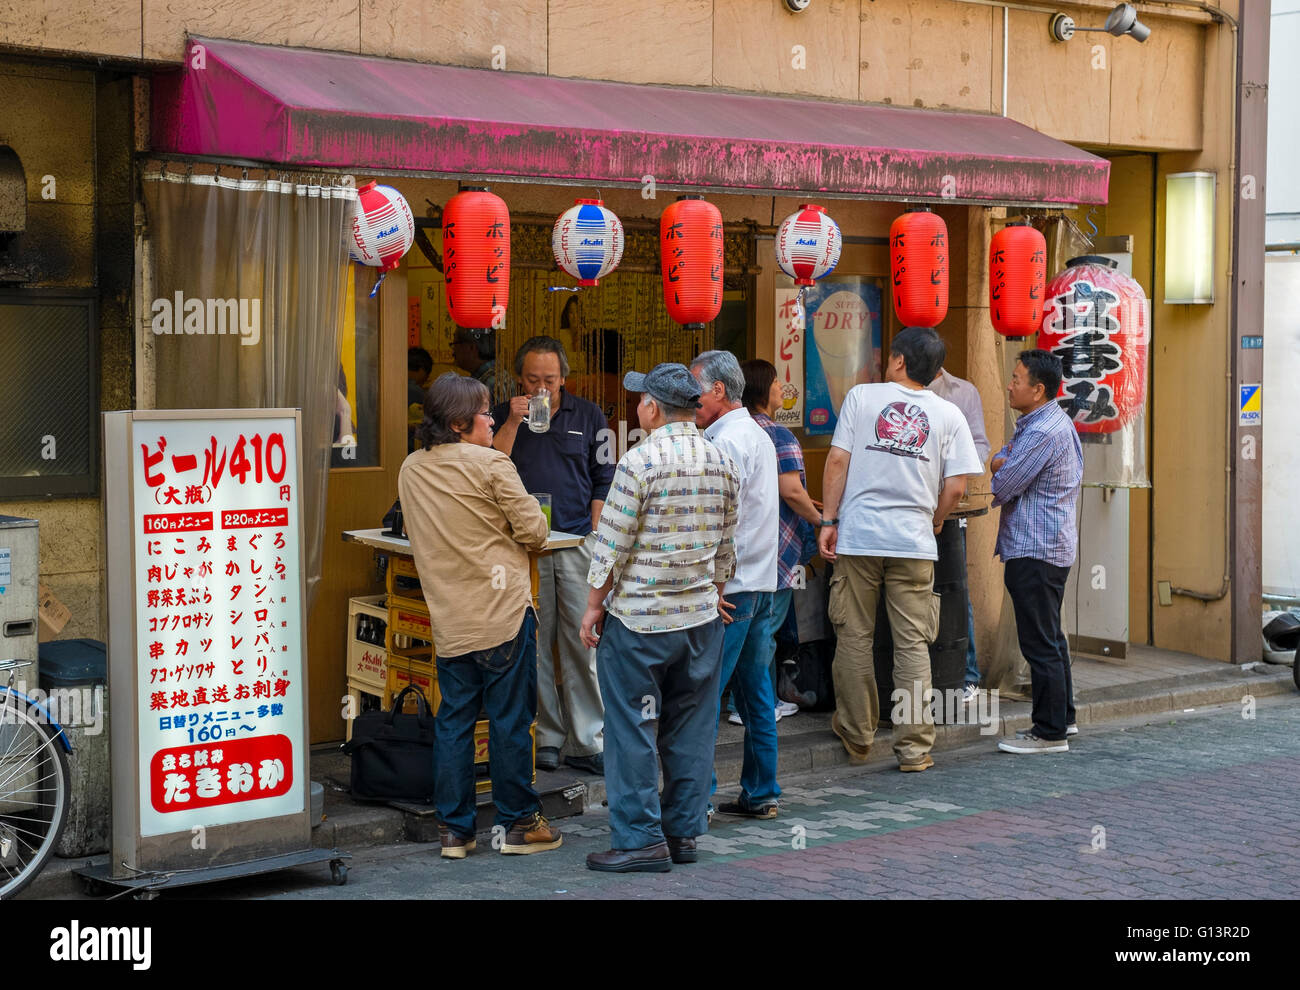 People eating and drinking in Japan Stock Photo